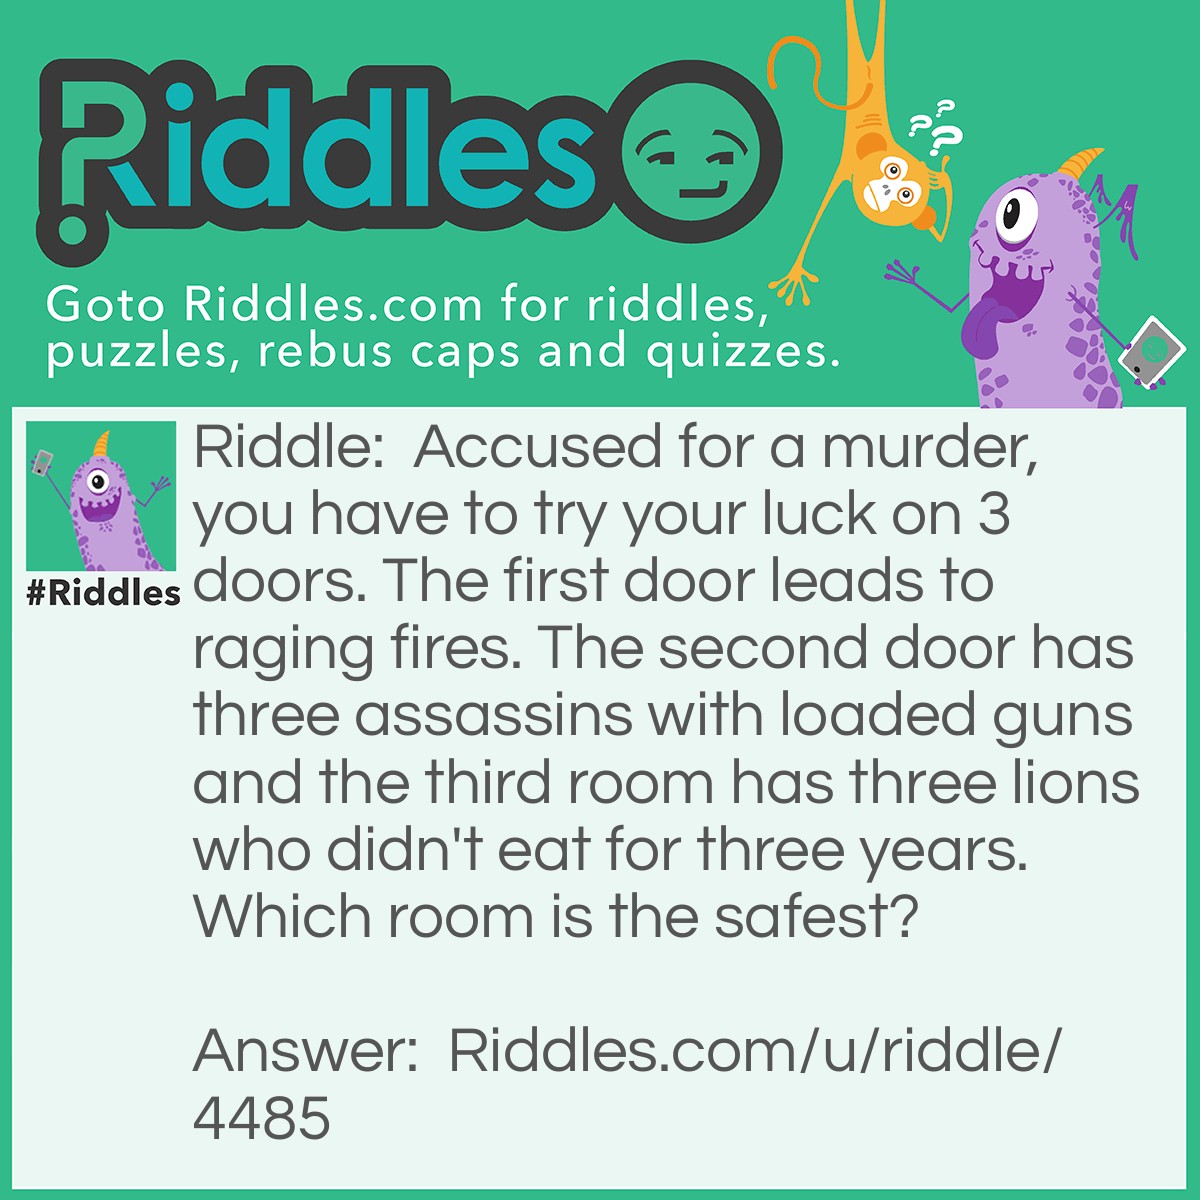 Riddle: Accused for a murder, you have to try your luck on 3 doors. The first door leads to raging fires. The second door has three assassins with loaded guns and the third room has three lions who didn't eat for three years. Which room is the safest? Answer: The third room is the safest! The lions are more likely to be dead if they didn't eat for three years!